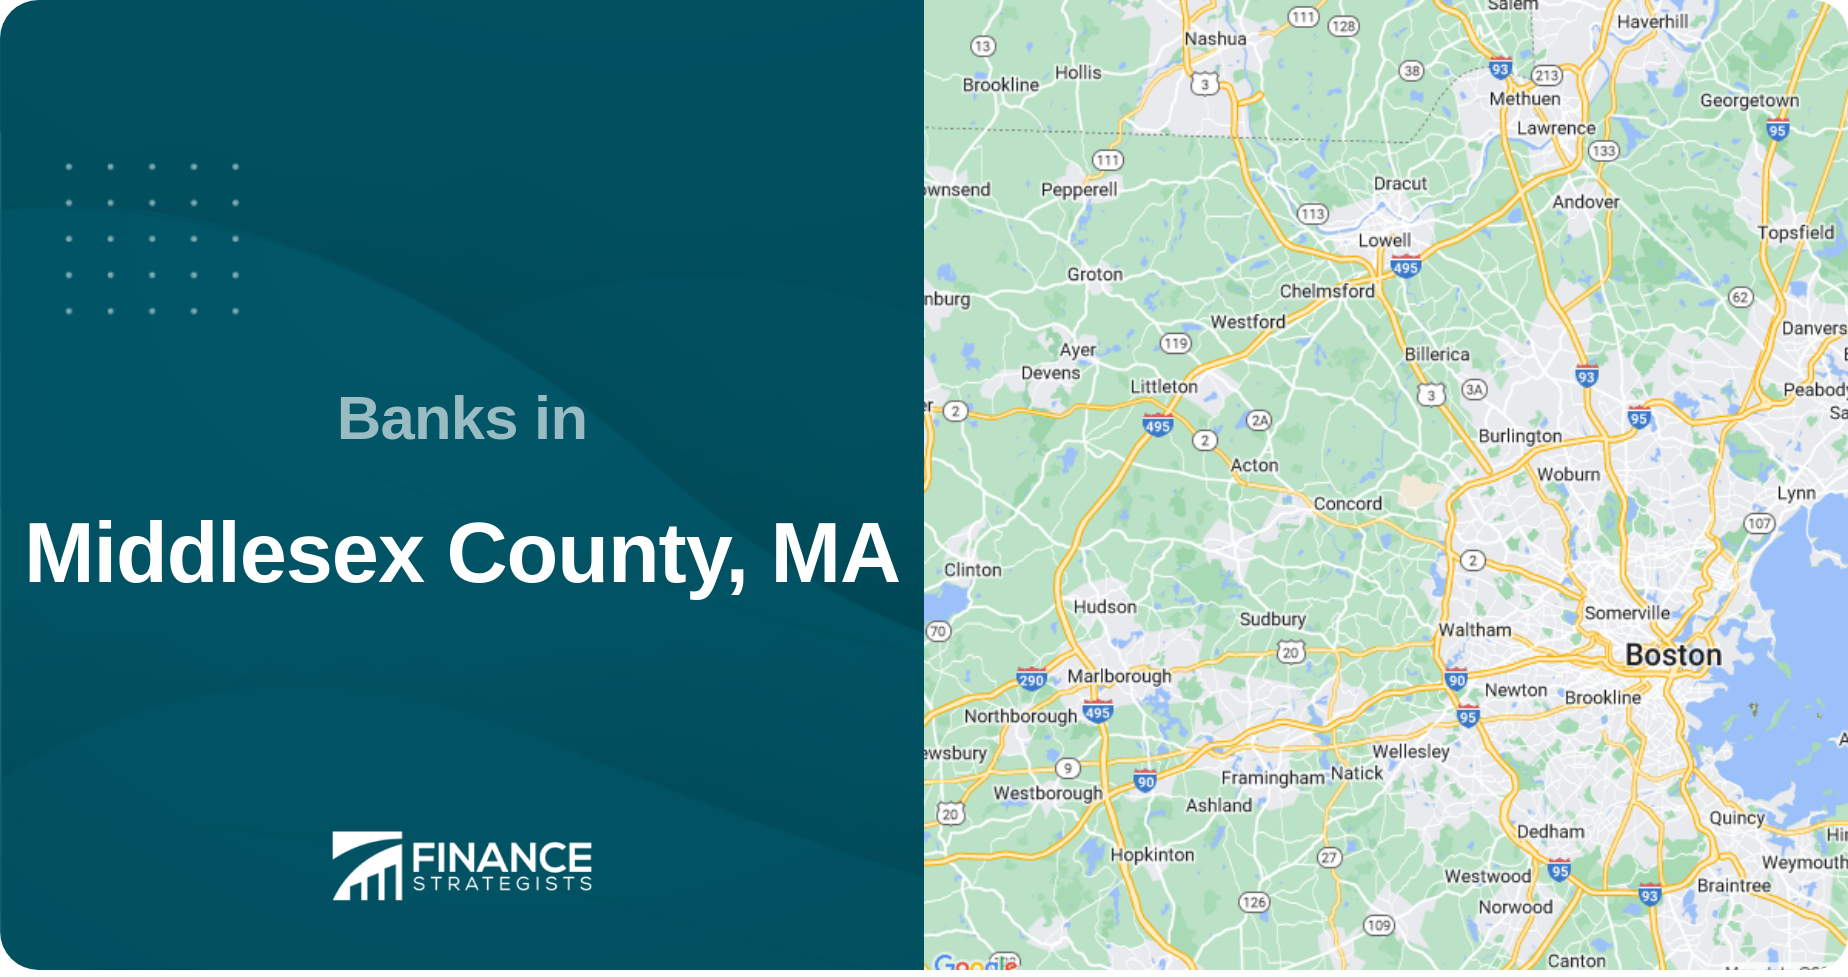 Banks in Middlesex County, MA